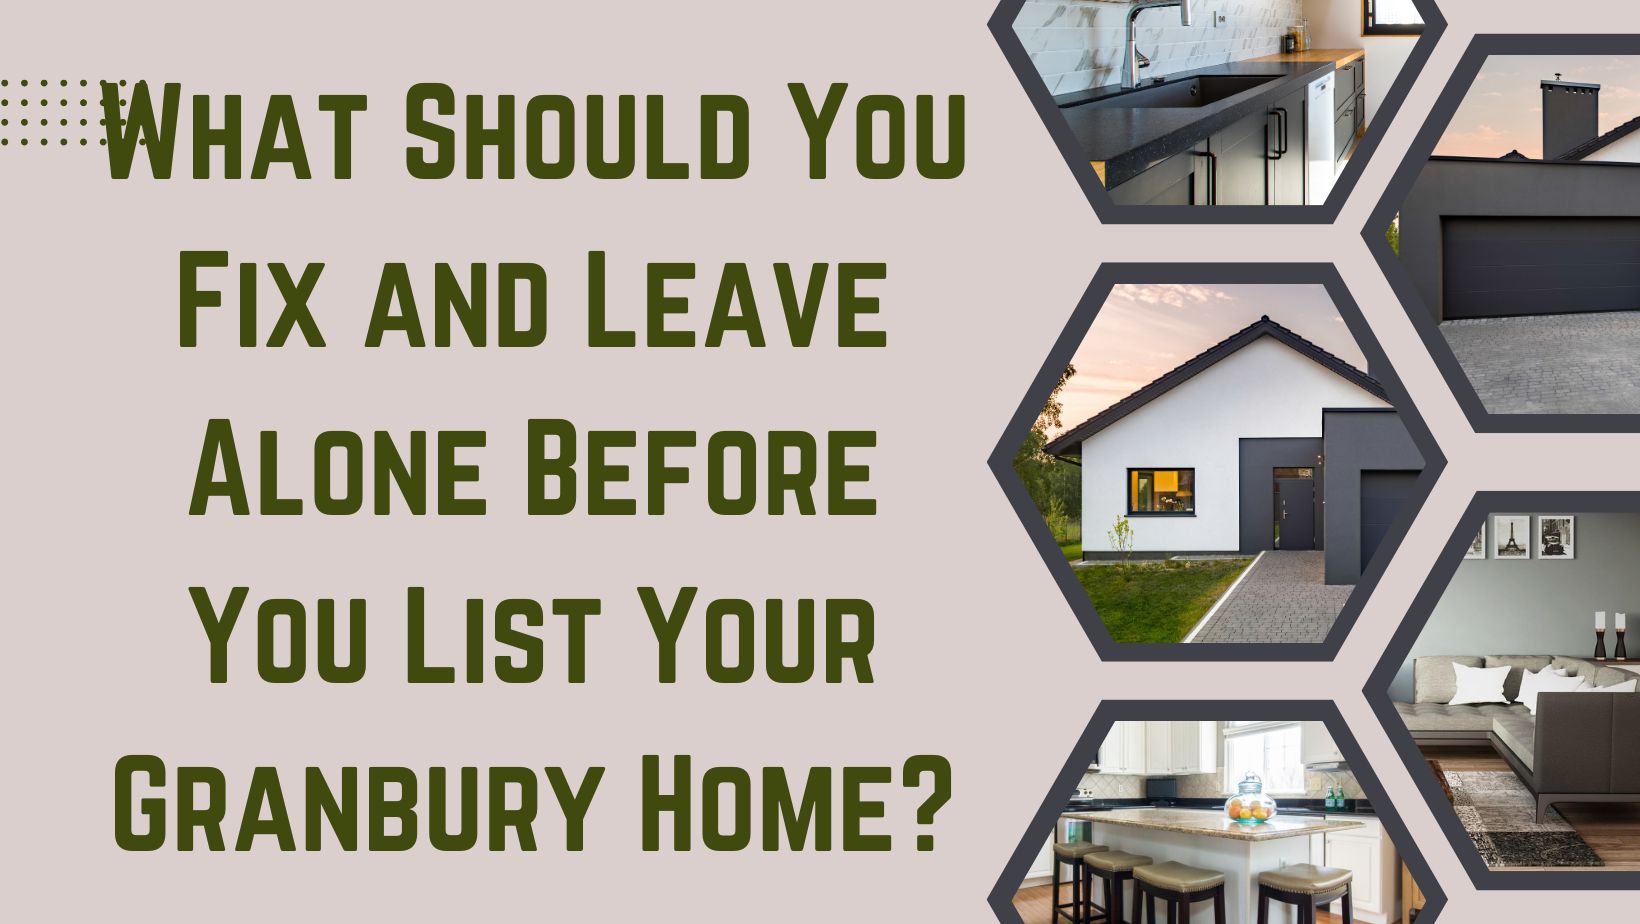 What Should You Fix and Leave Alone Before You List Your Granbury Home?